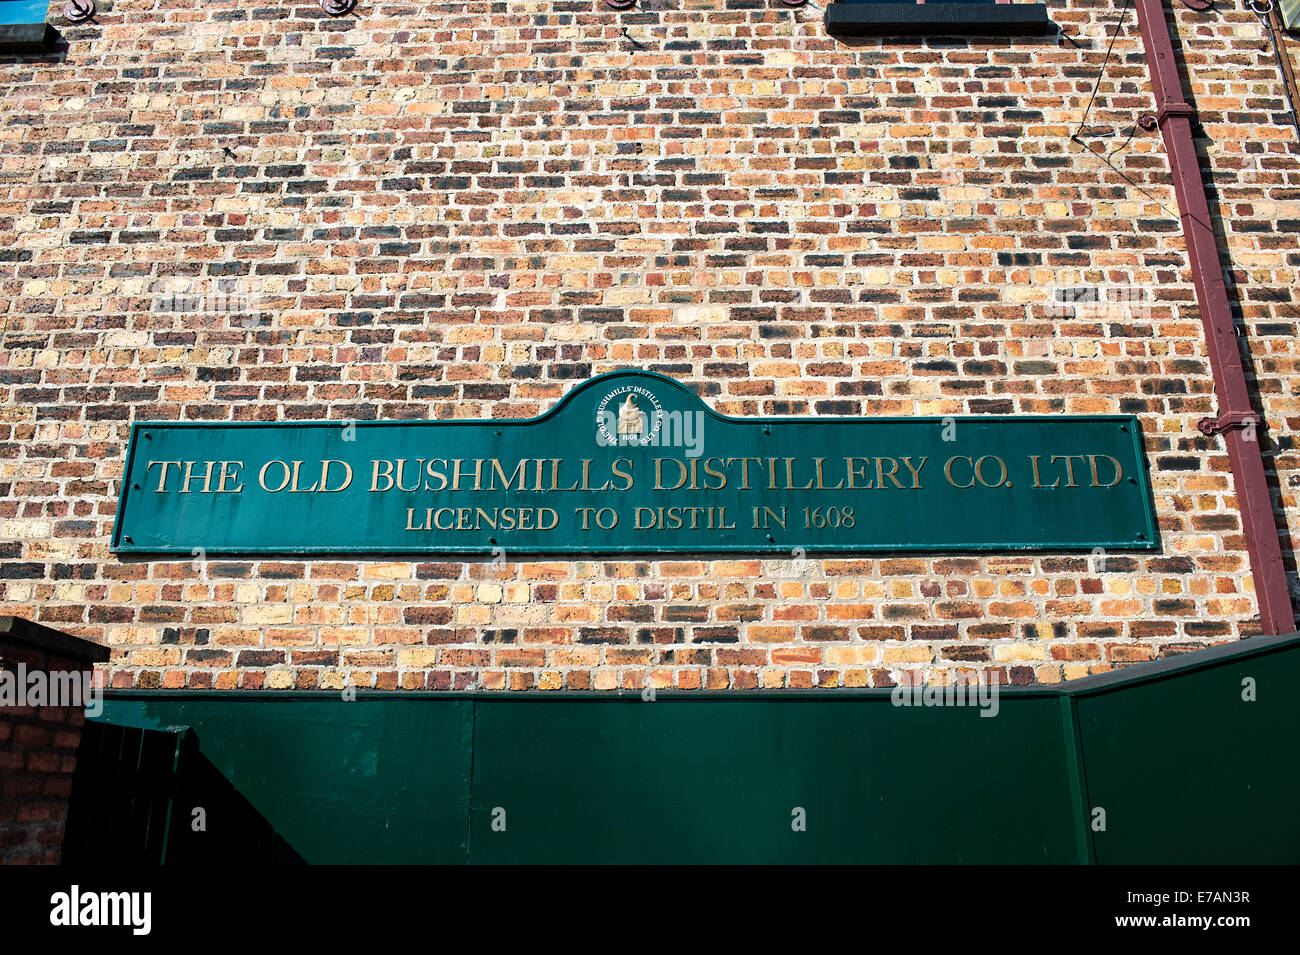 Old Bushmills Distillery sign on exterior wall of Old Bushmills Distillery, Bushmills, County Antrim, Northern Ireland. Stock Photo